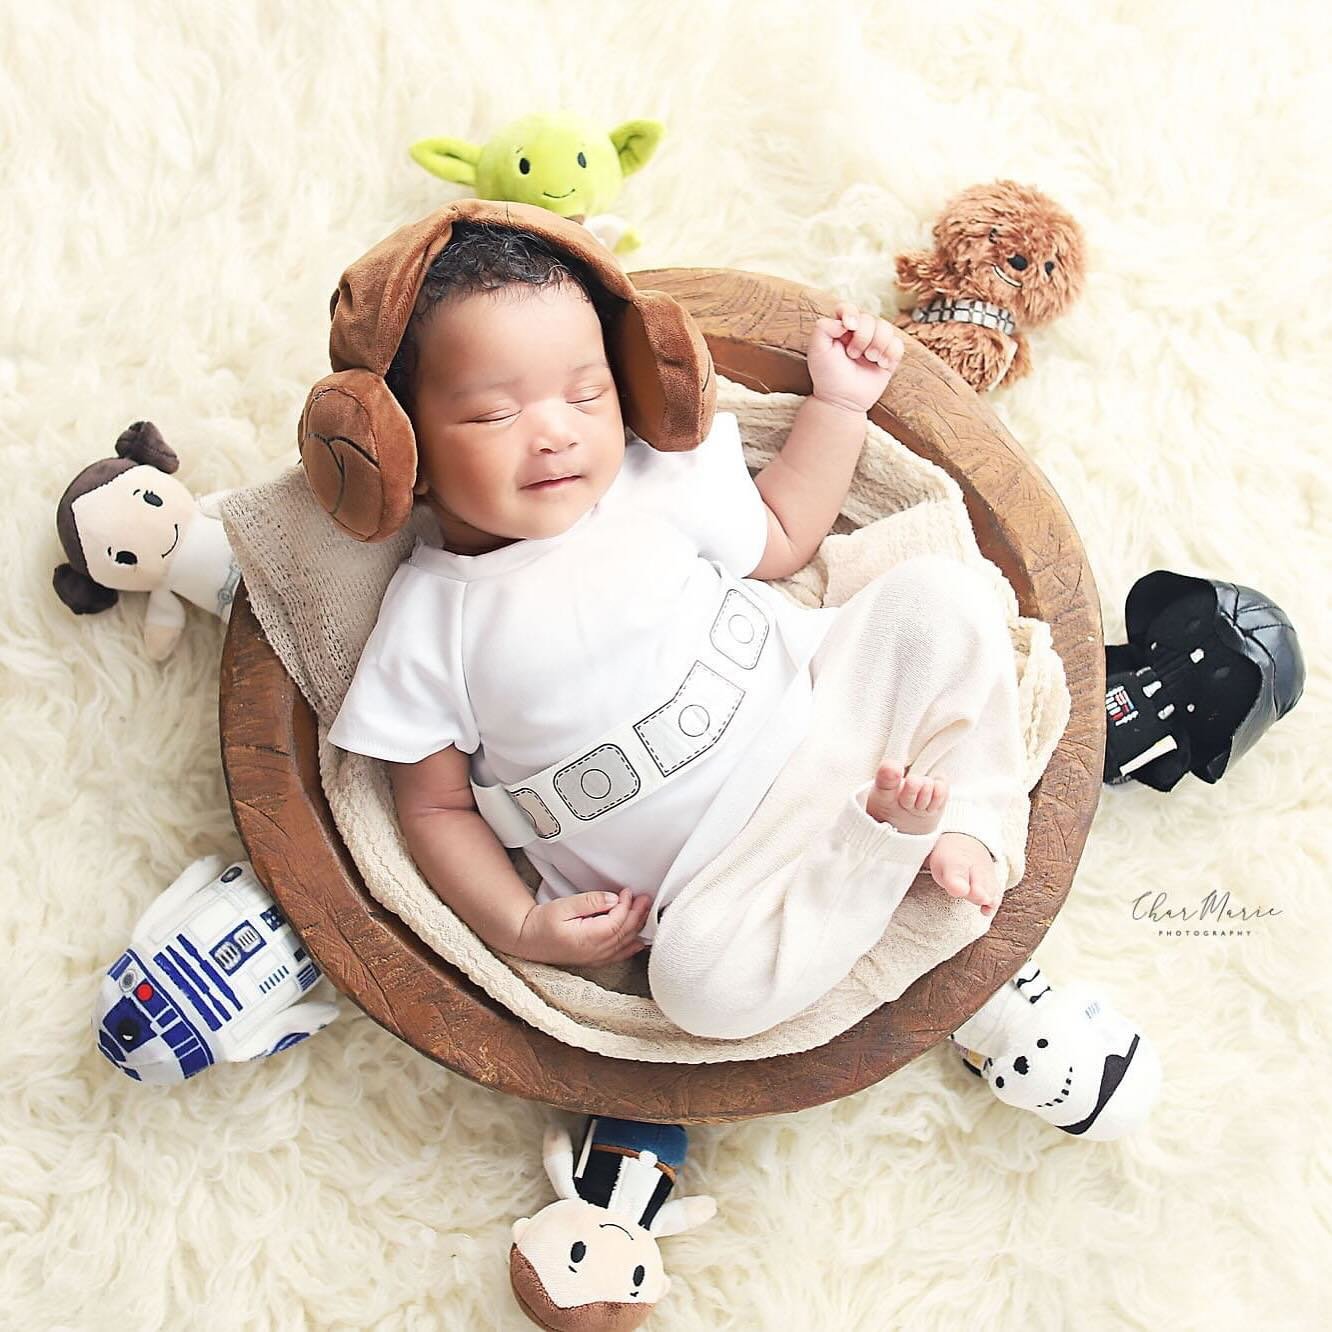 May The 4Th Be With You ✨
.
.
.
#ncphotographer #charlottephotographer #charlottenewbornphotographer #charlottebabyphotographer #newbornphotography #babyphotography #babygirl #starwarsday #may4 #princess
#paulcbuff #canonusa